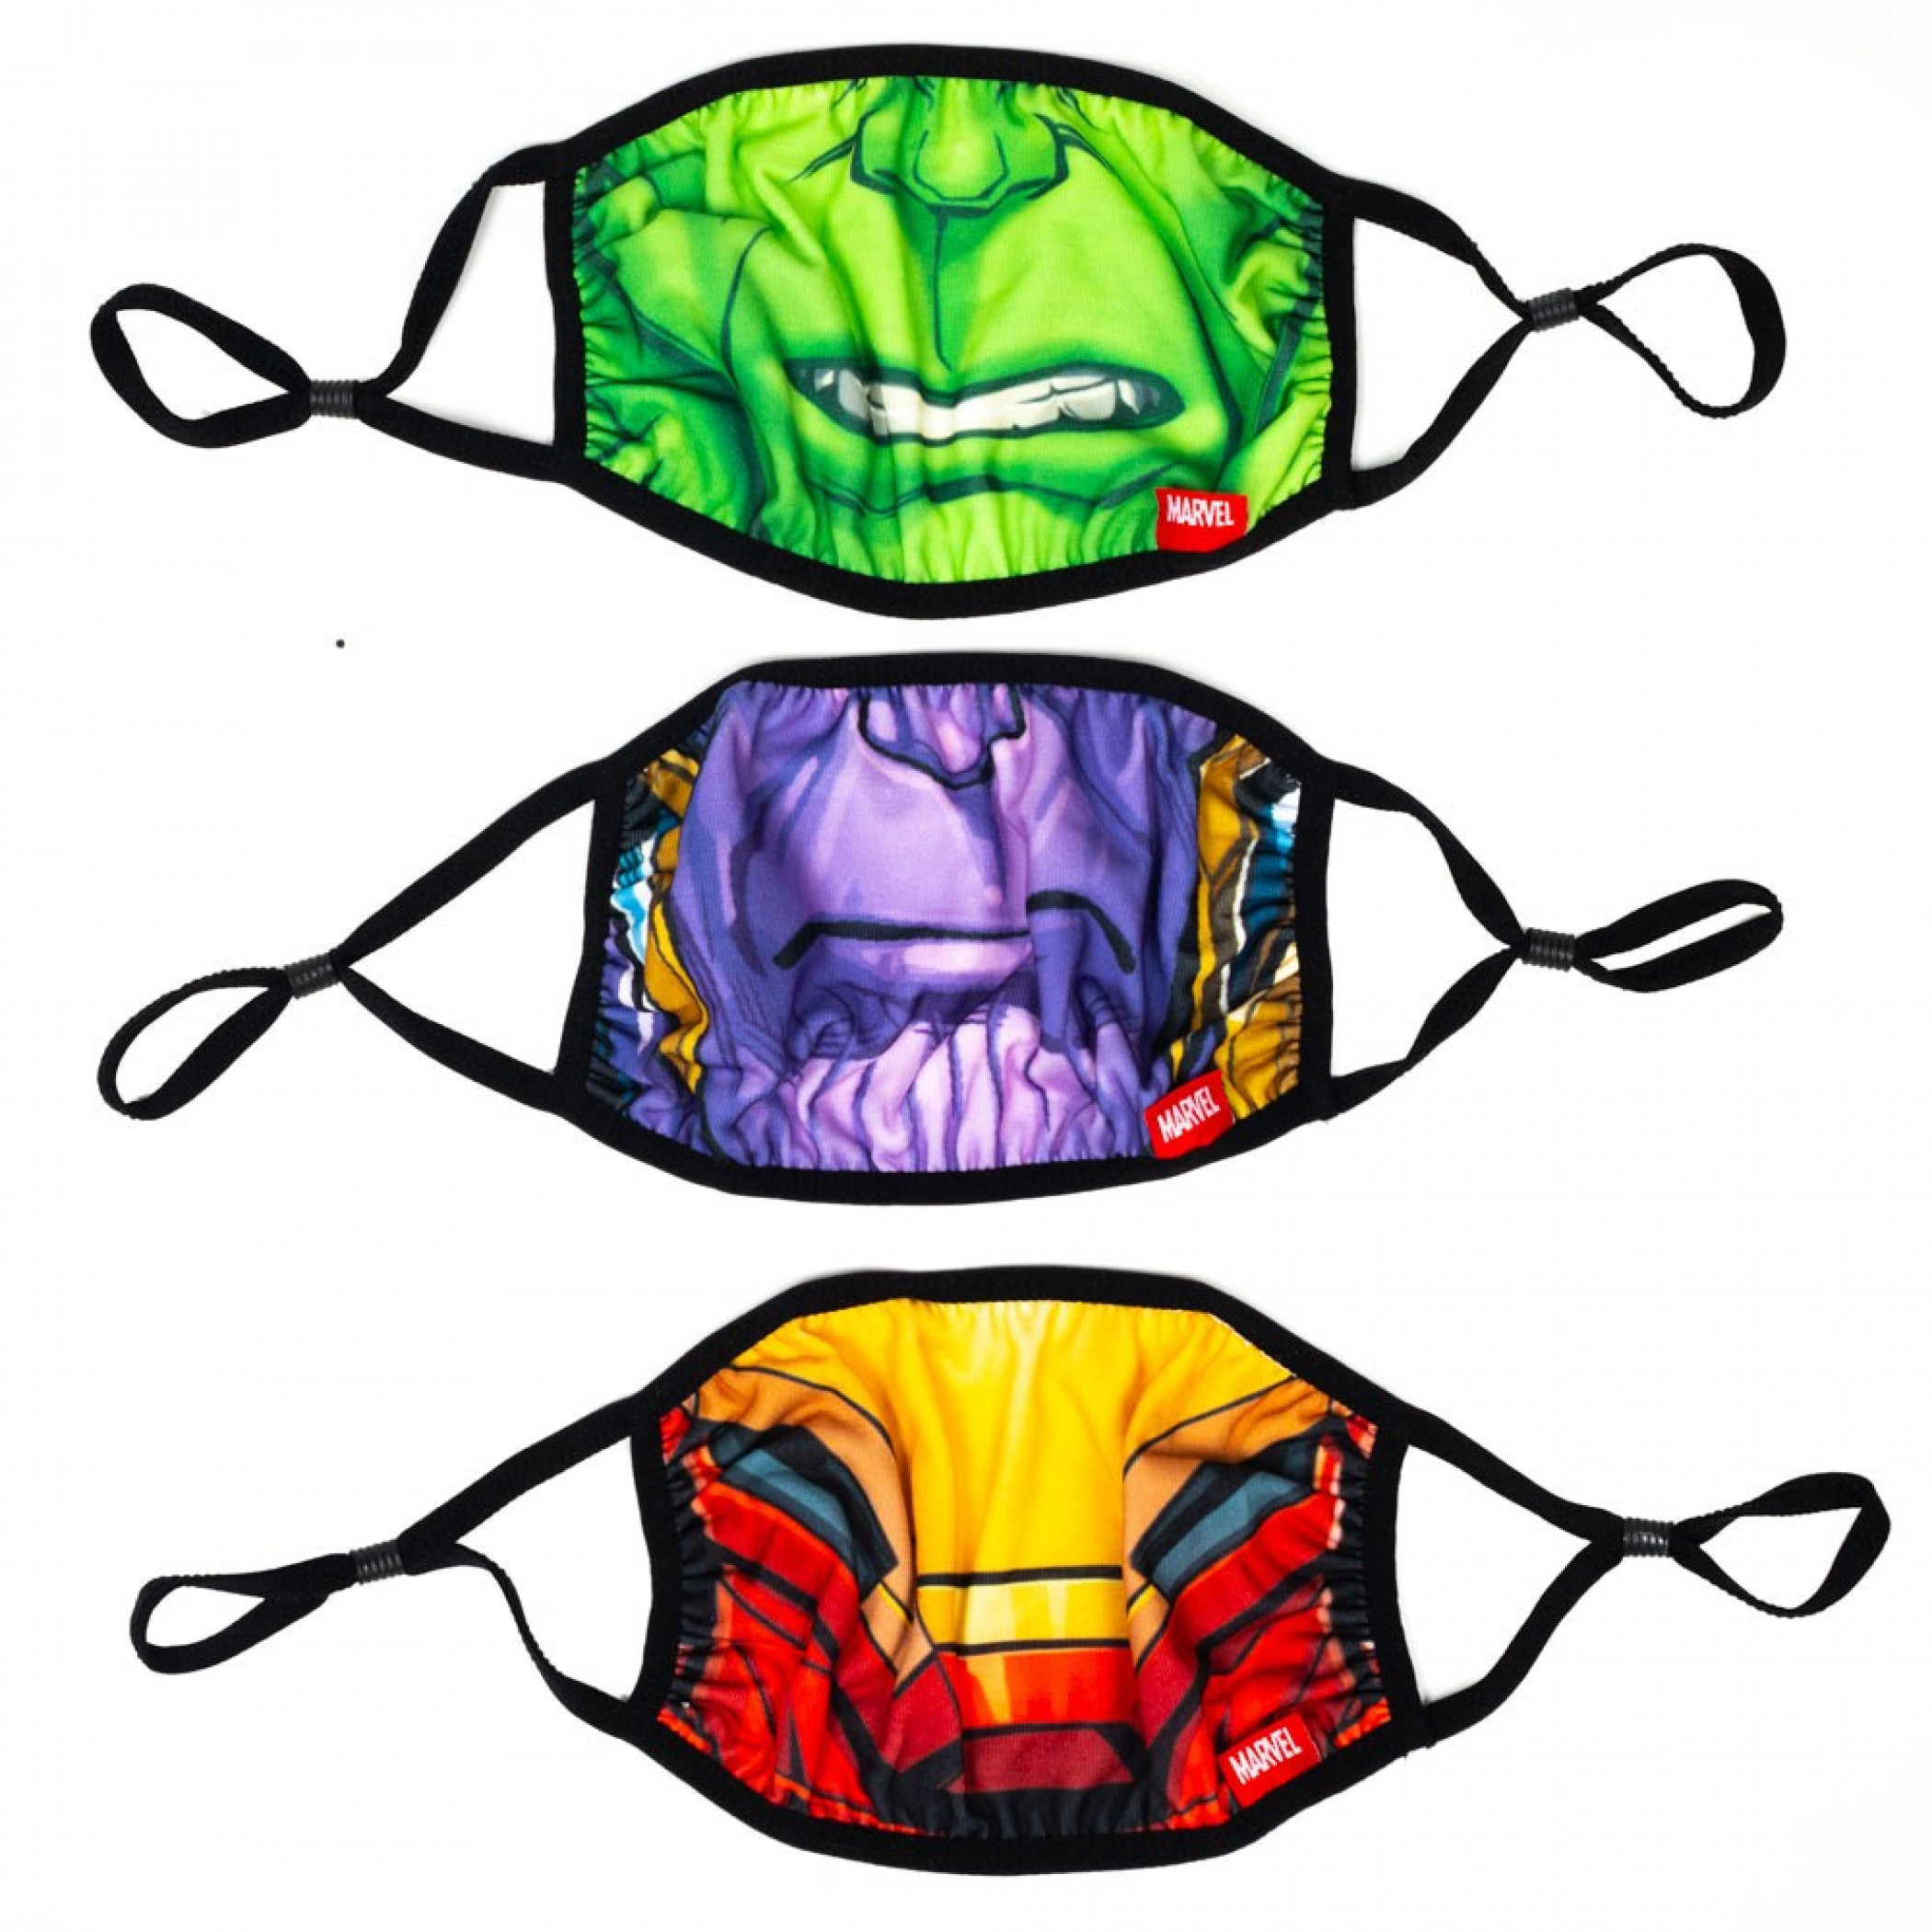 Marvel Avengers Big Face 3-Pack of Adjustable Reusable Face Covers